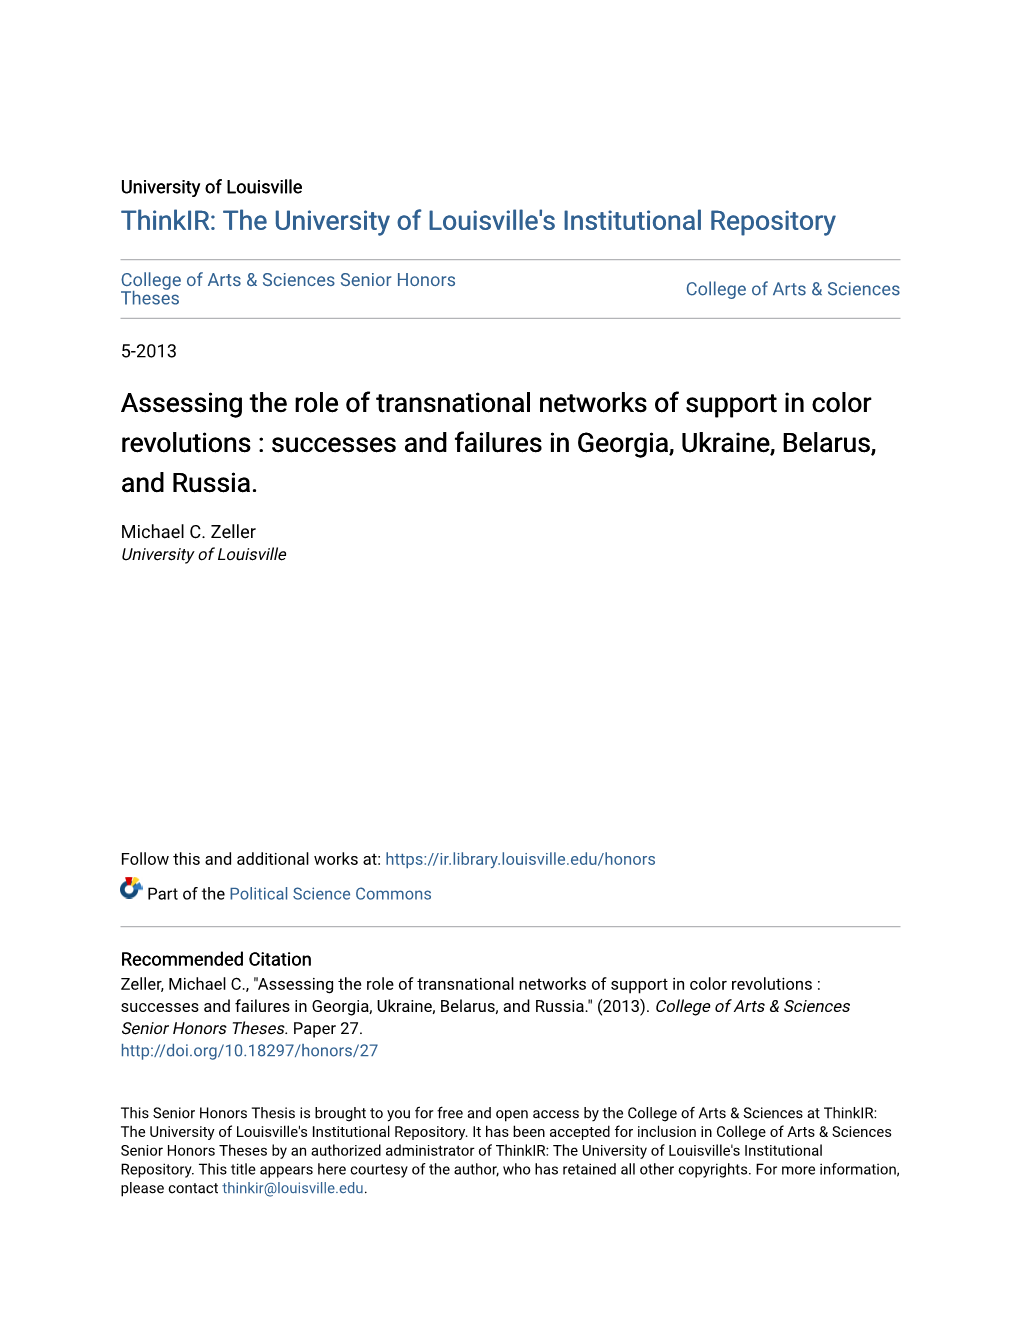 Assessing the Role of Transnational Networks of Support in Color Revolutions : Successes and Failures in Georgia, Ukraine, Belarus, and Russia